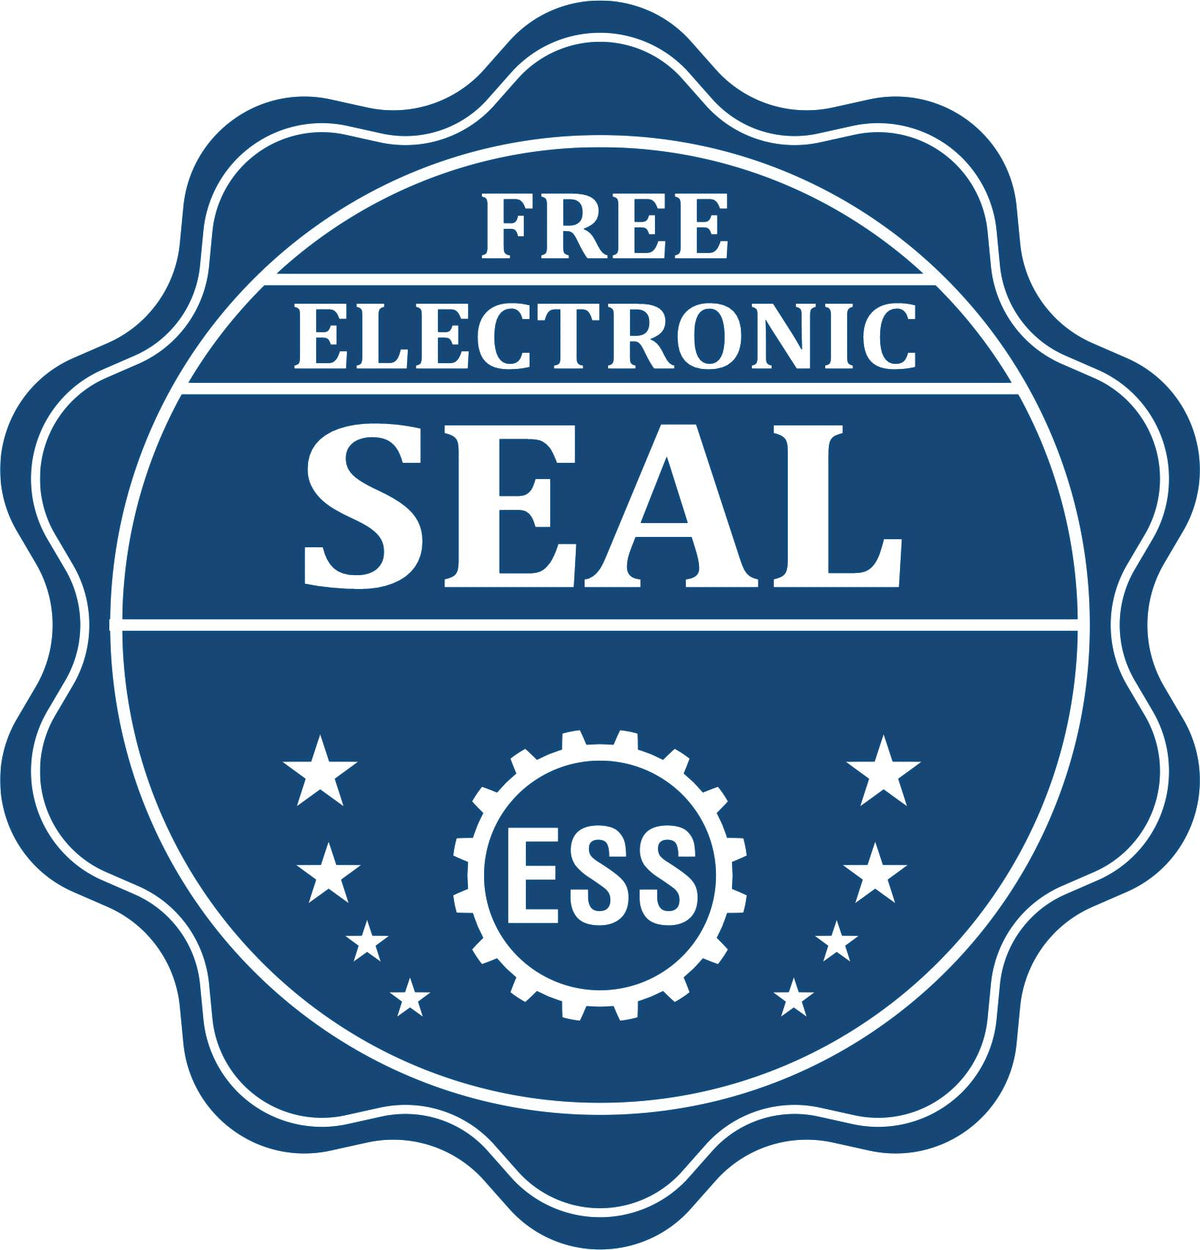 A badge showing a free electronic seal for the Utah Desk Architect Embossing Seal with stars and the ESS gear on the emblem.